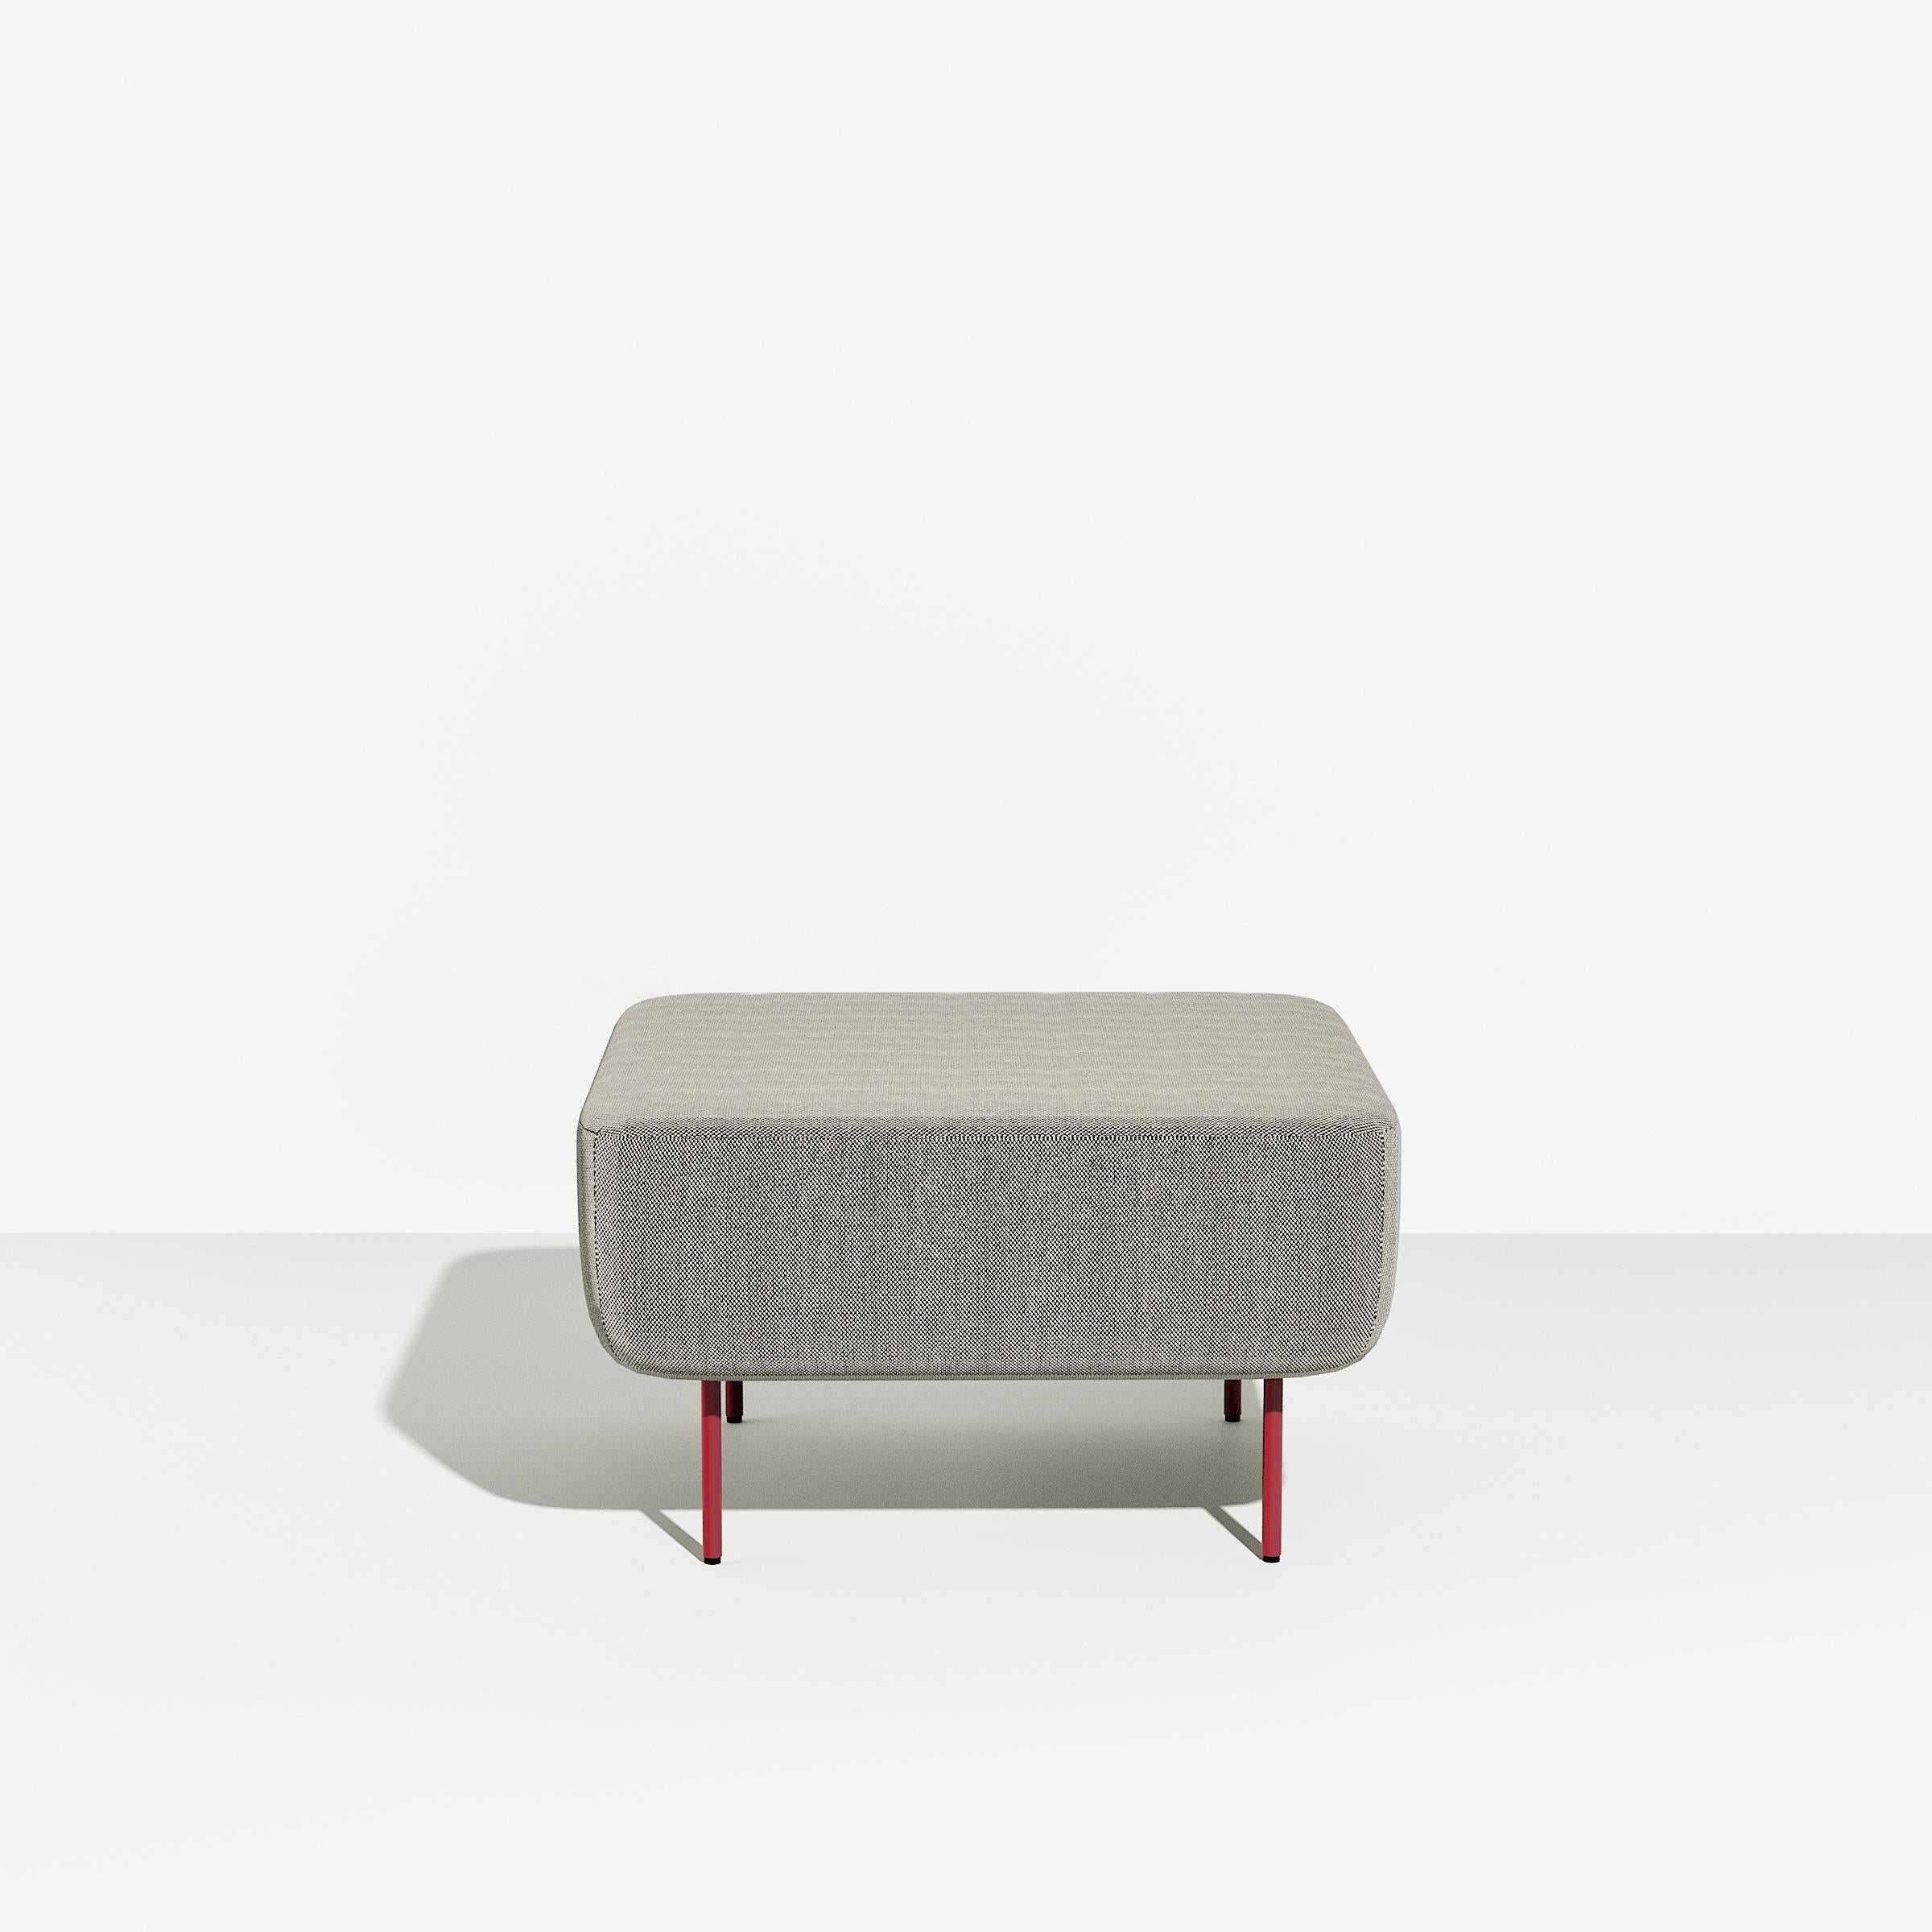 Petite Friture Medium Hoff Stool in Grey-black by Morten & Jonas, 2015

Hoff created by designer duo Morten & Jonas is a collection of two modular stools and two modular armchairs. they can combine to make a sofa as well an entire living room